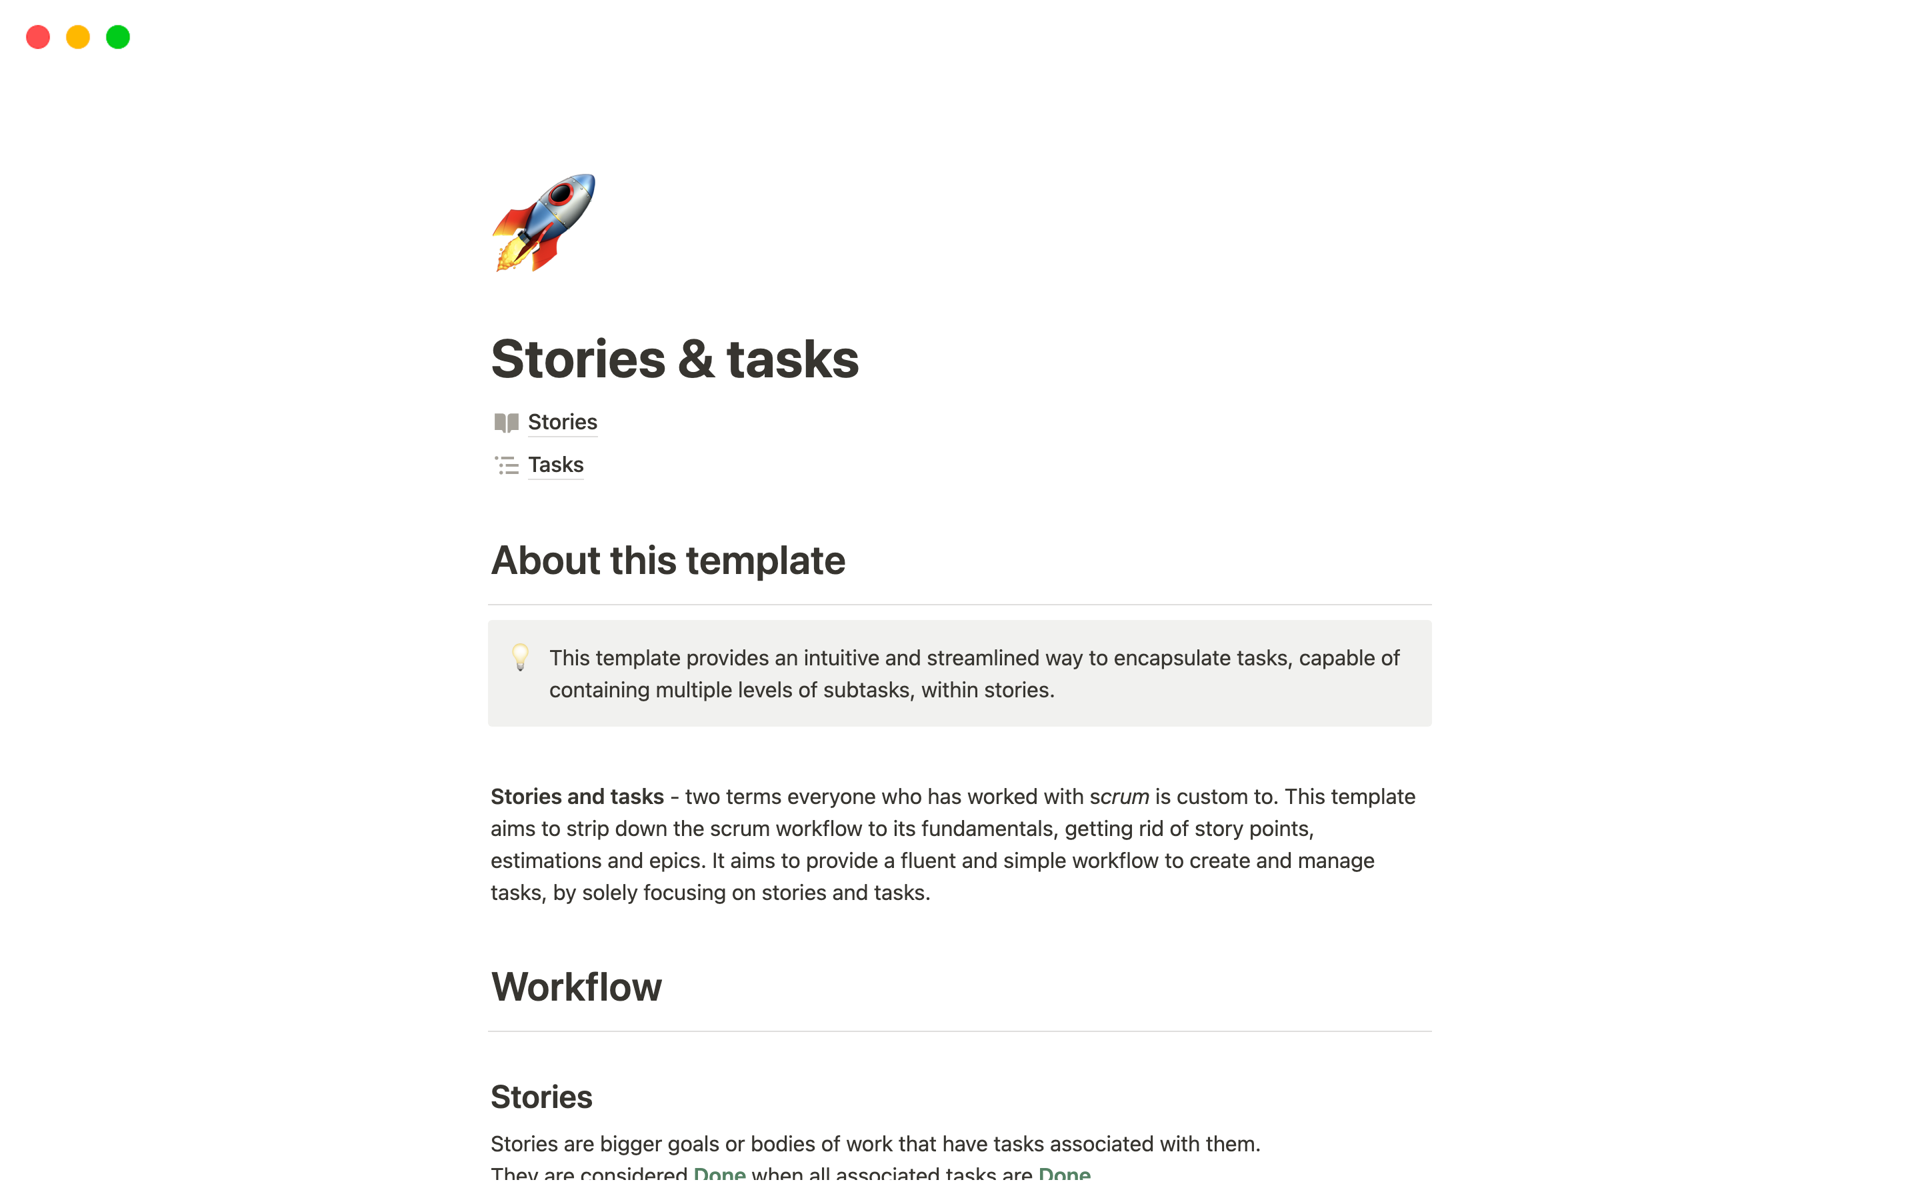 This project management template allows users to easily create and manage stories consisting out of tasks.